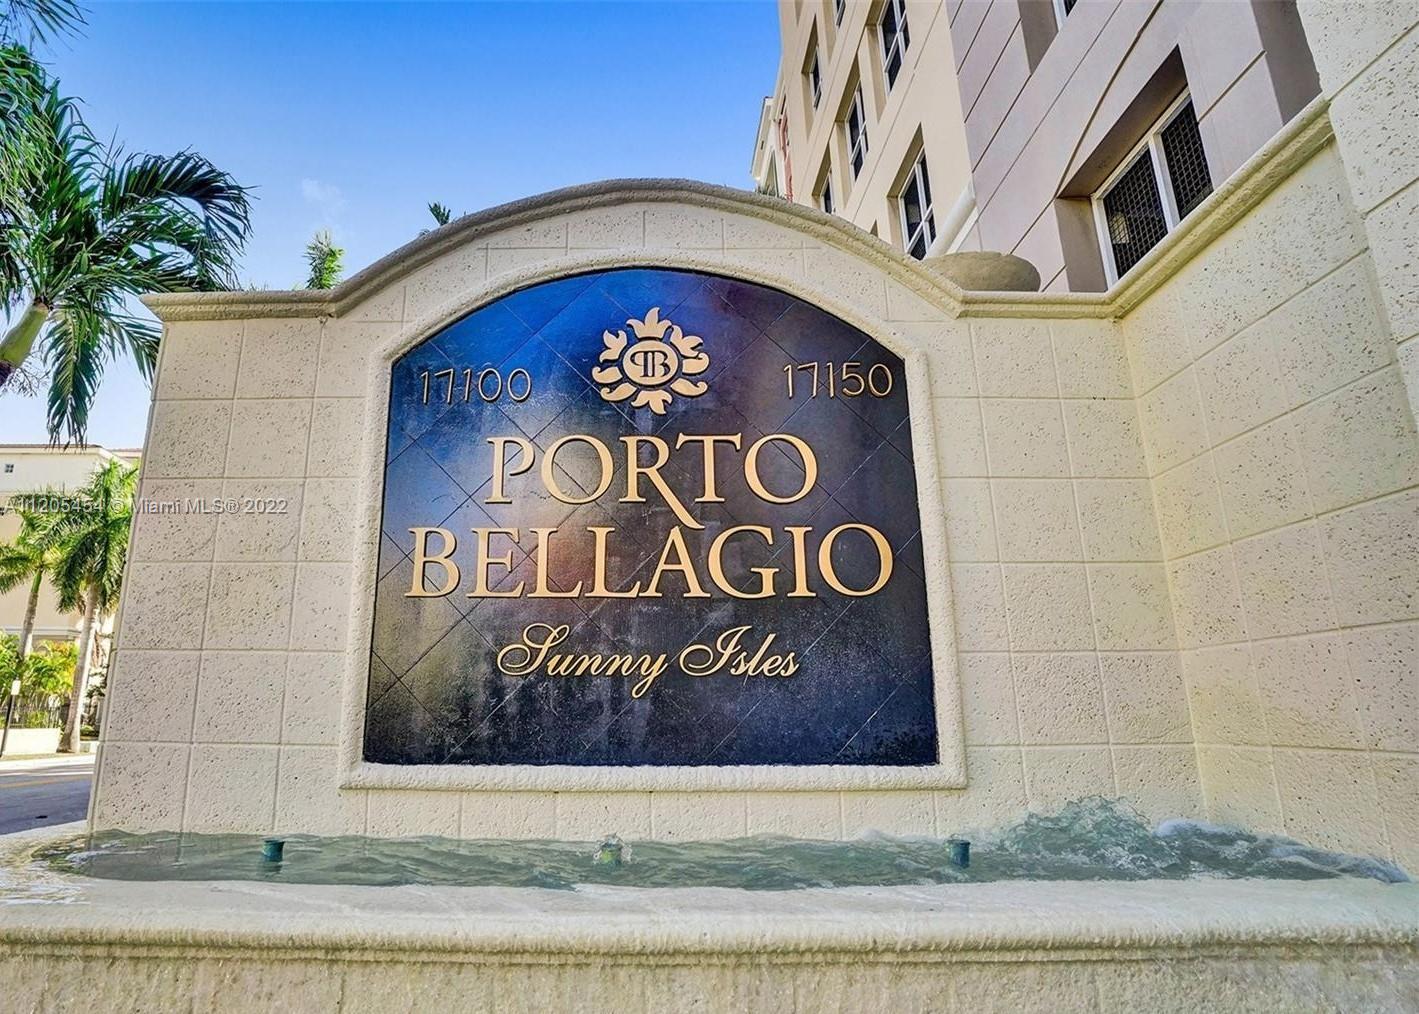 WELCOME TO PORTO BELLAGIO - TASTEFULLY REMODELED 2 BEDROOM 2 BATHROOM UNIT IN THE HEART OF SUNNY ISL